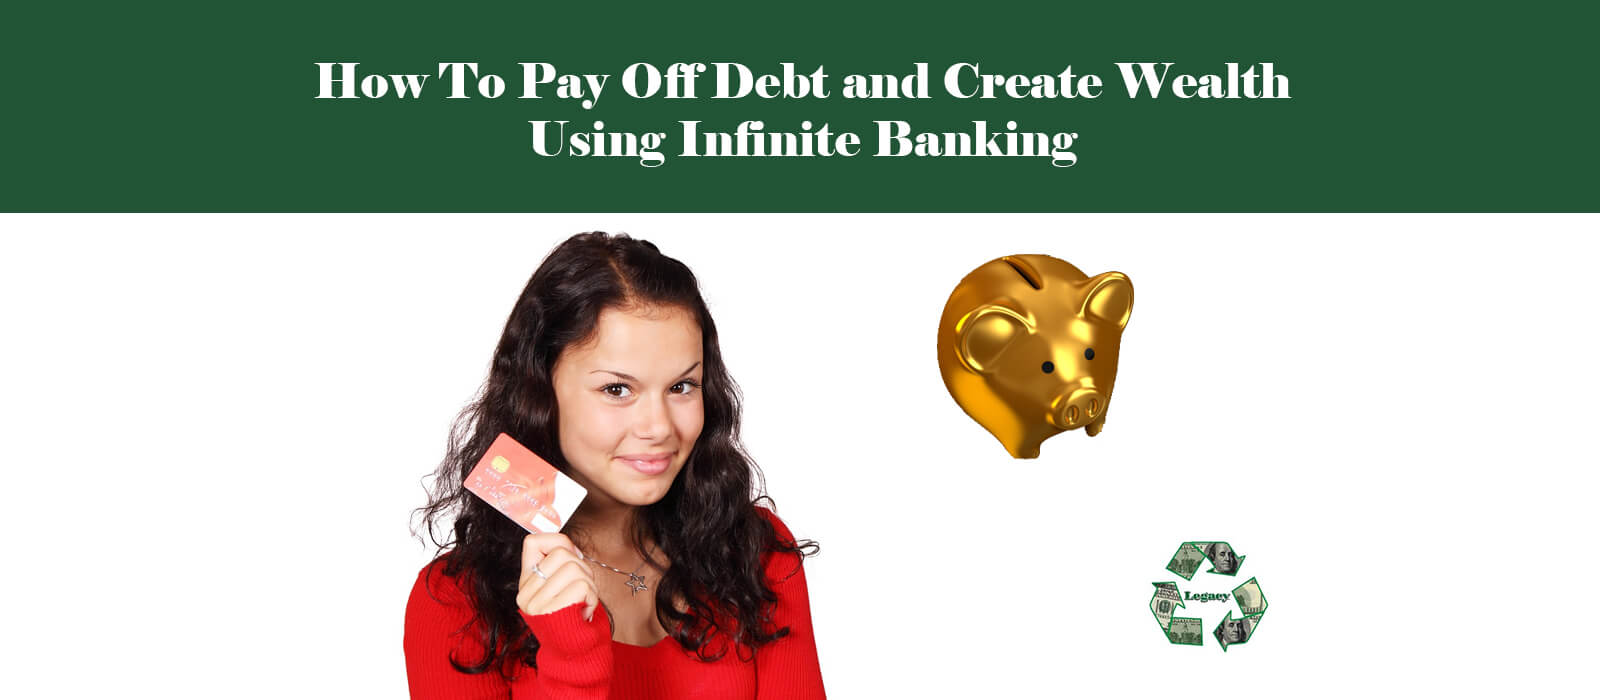 How To Pay Off Debt and Create Wealth Using Infinite Banking